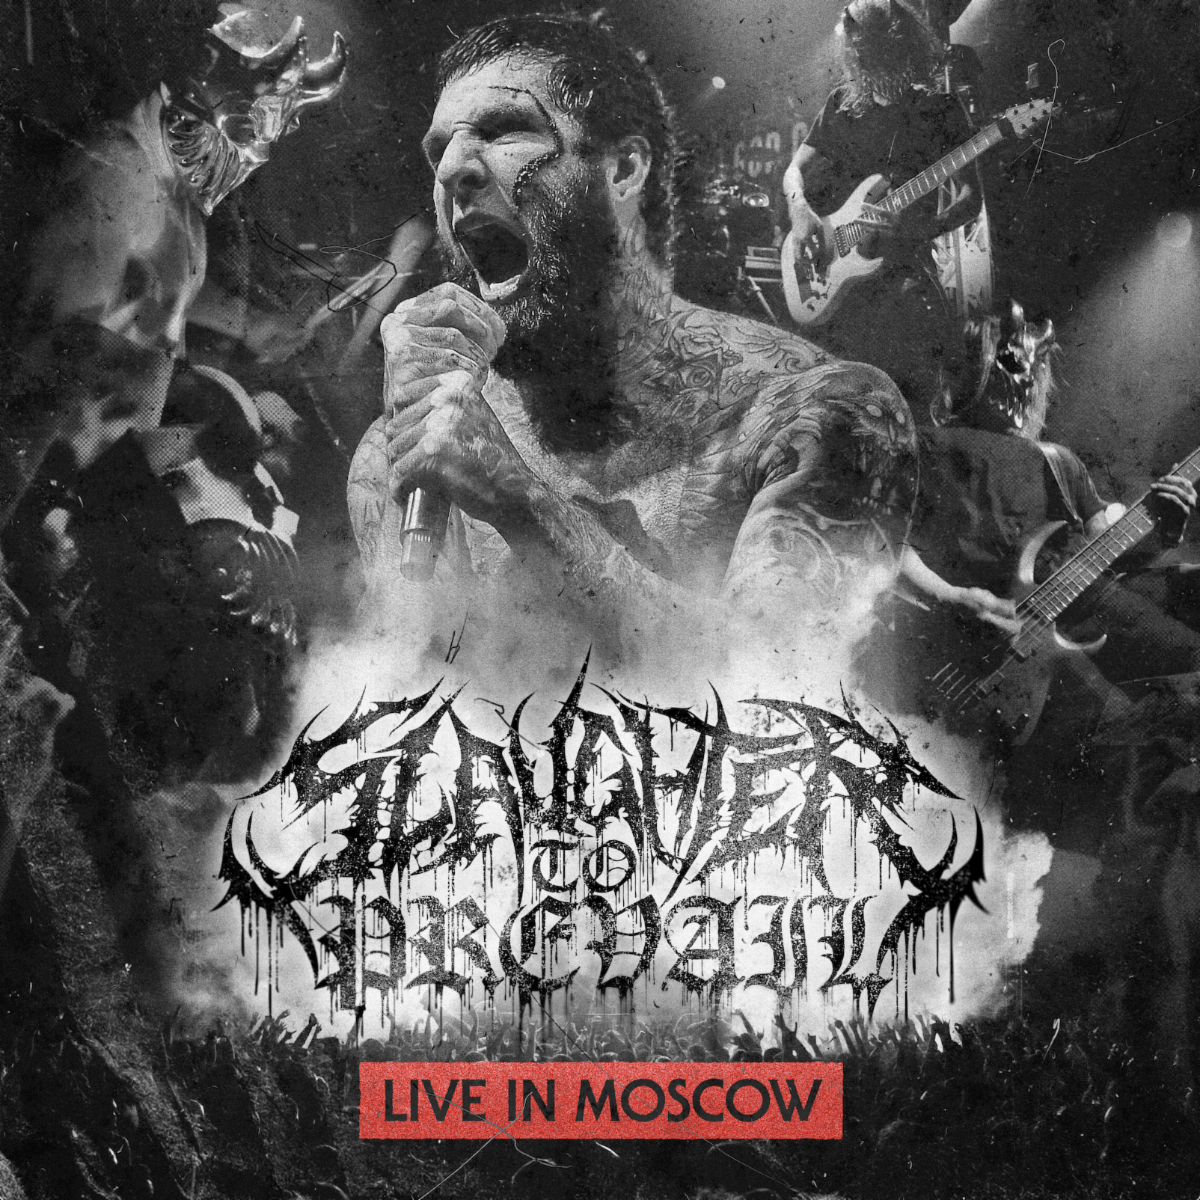 Slaughter To Prevail Drop Live Album - 'Live In Moscow'; Global Livestream PPV Premiere of Concert Airing Tonight